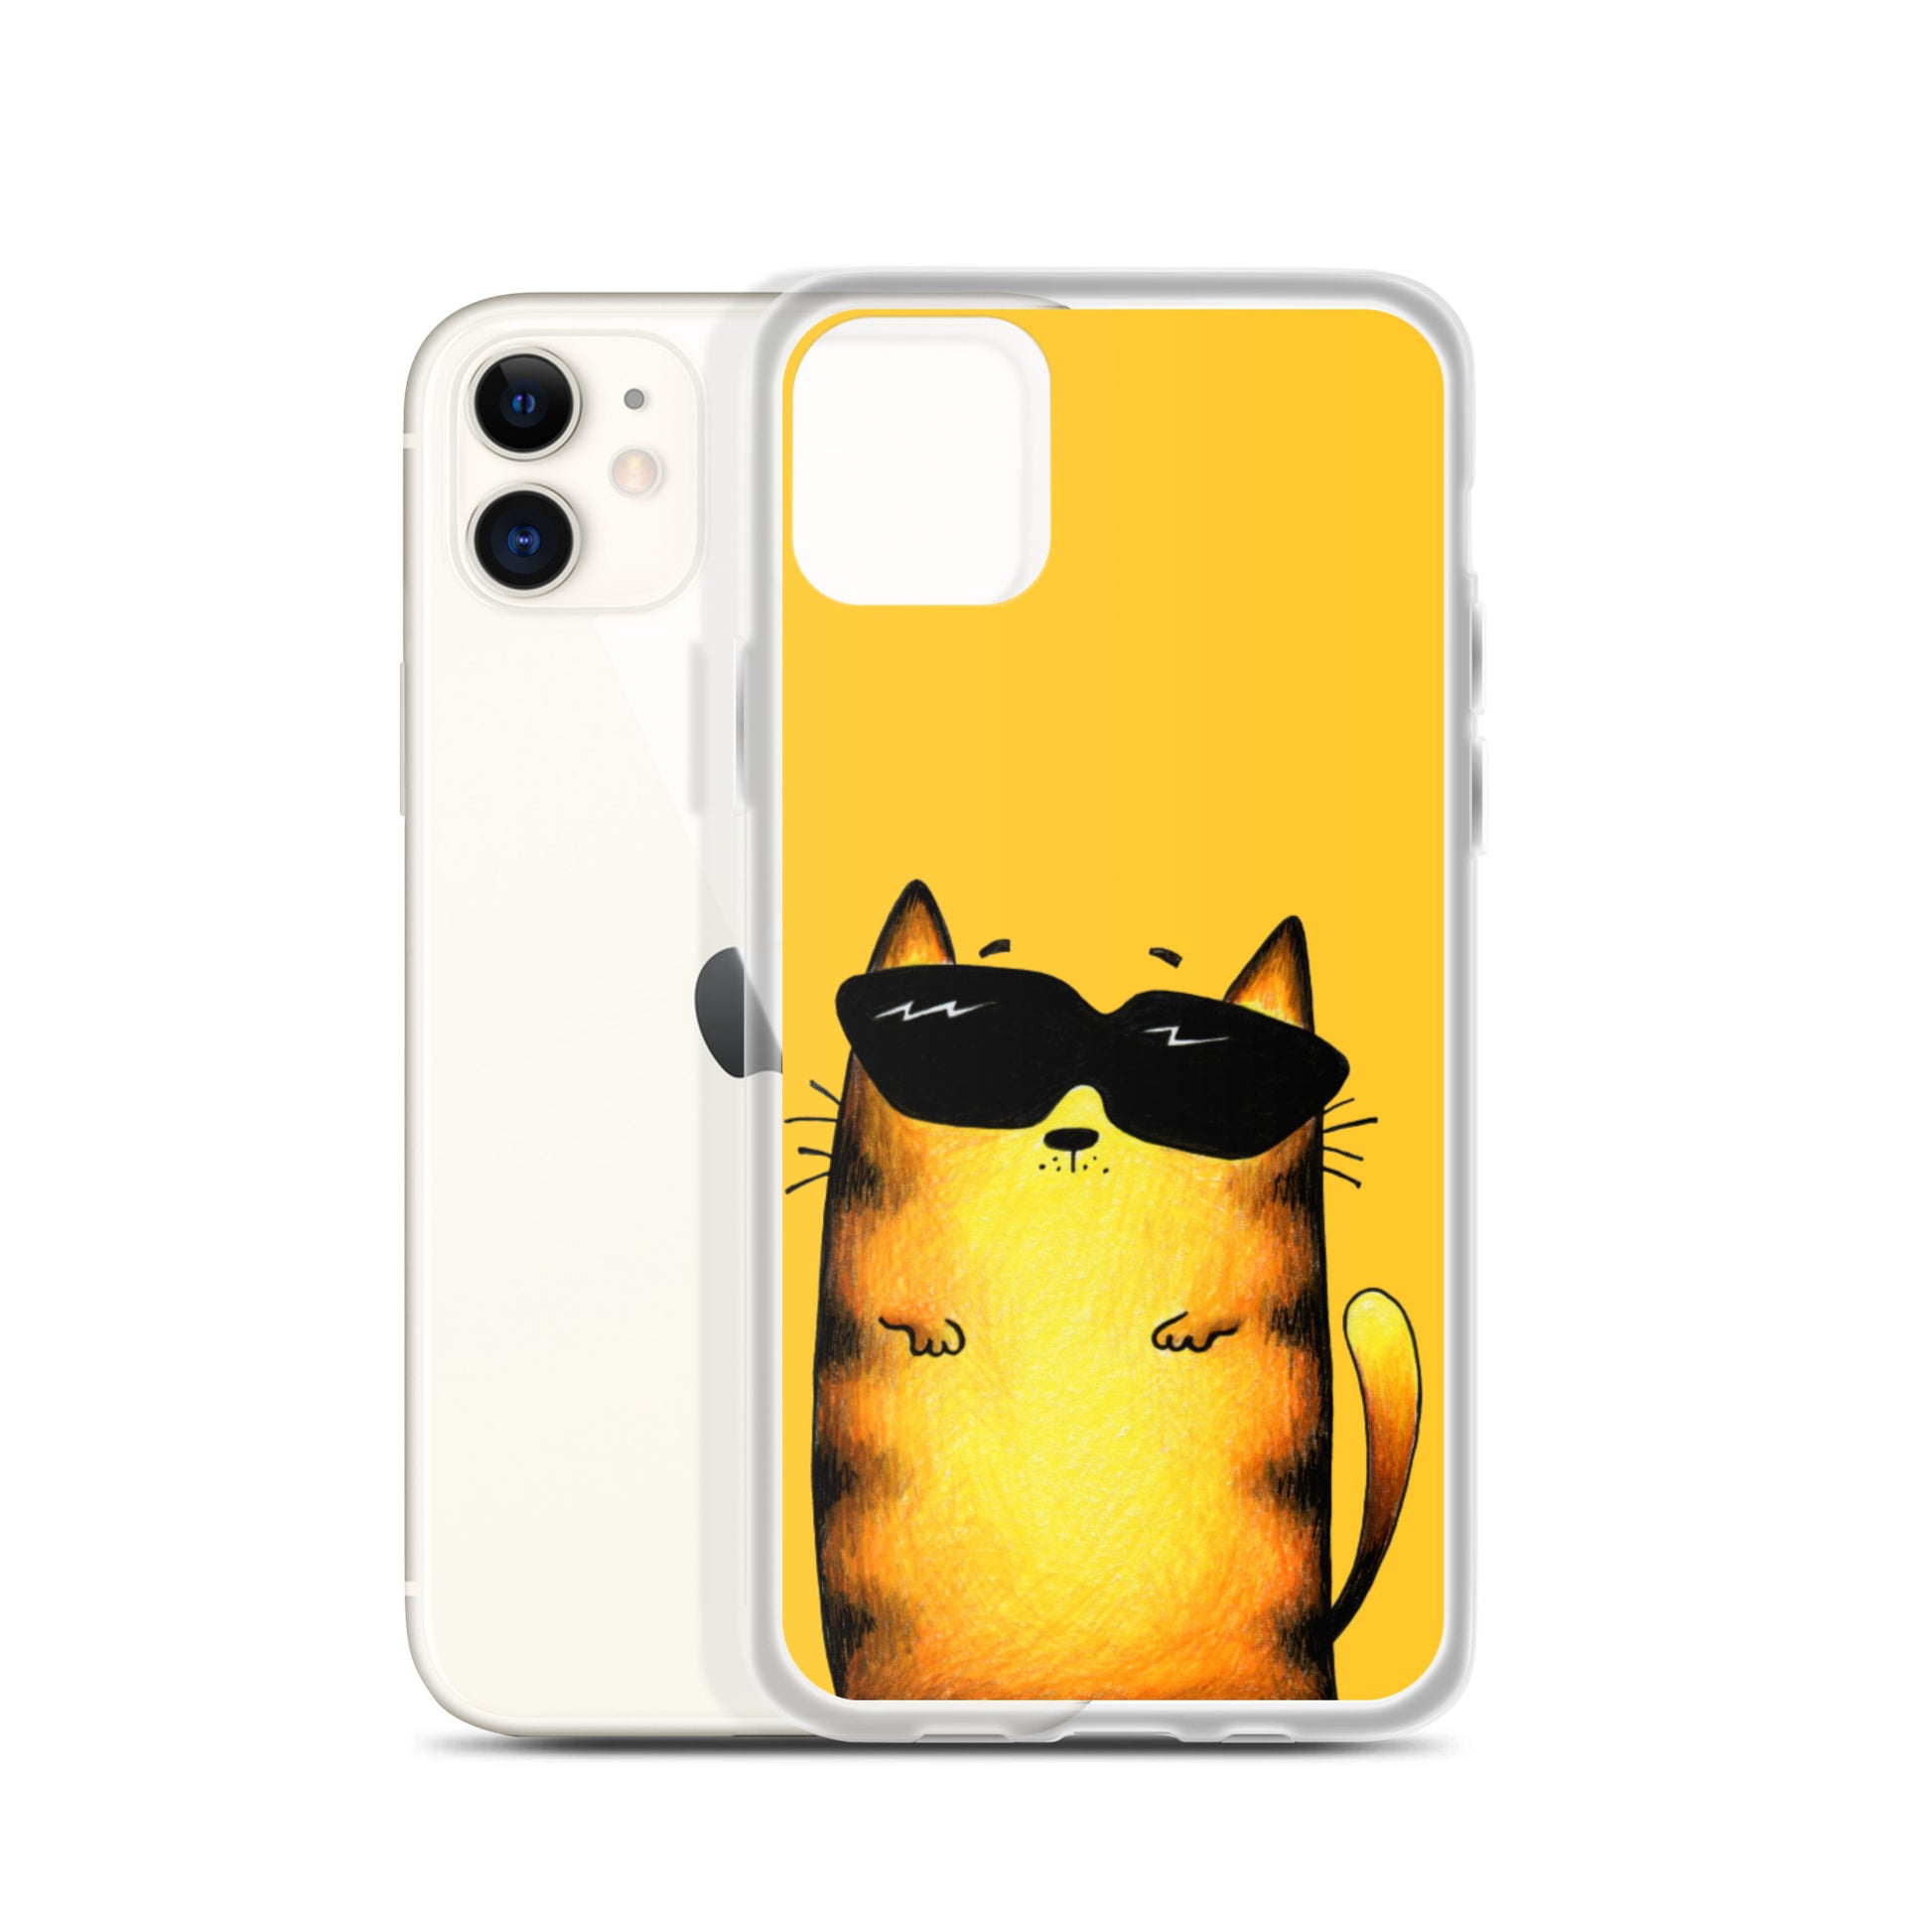 flexible yellow iphone 11 case with cat print